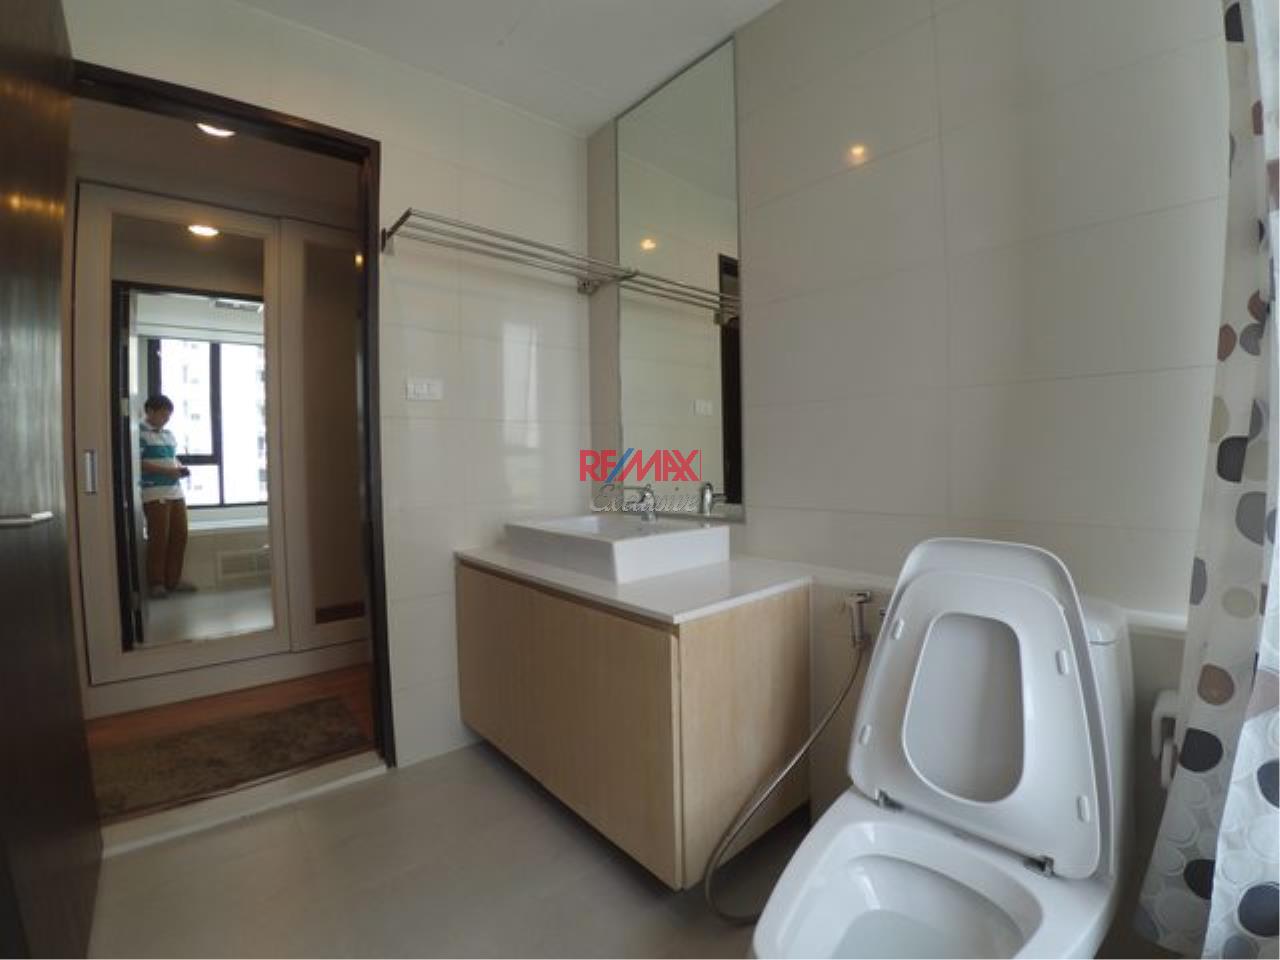 RE/MAX Exclusive Agency's THE ALCOVE, Thonglor 10, 44 Sqm., 1 Bedroom, Fully-Furnished, Fully Equipped Kitchen For RENT !!!! 7